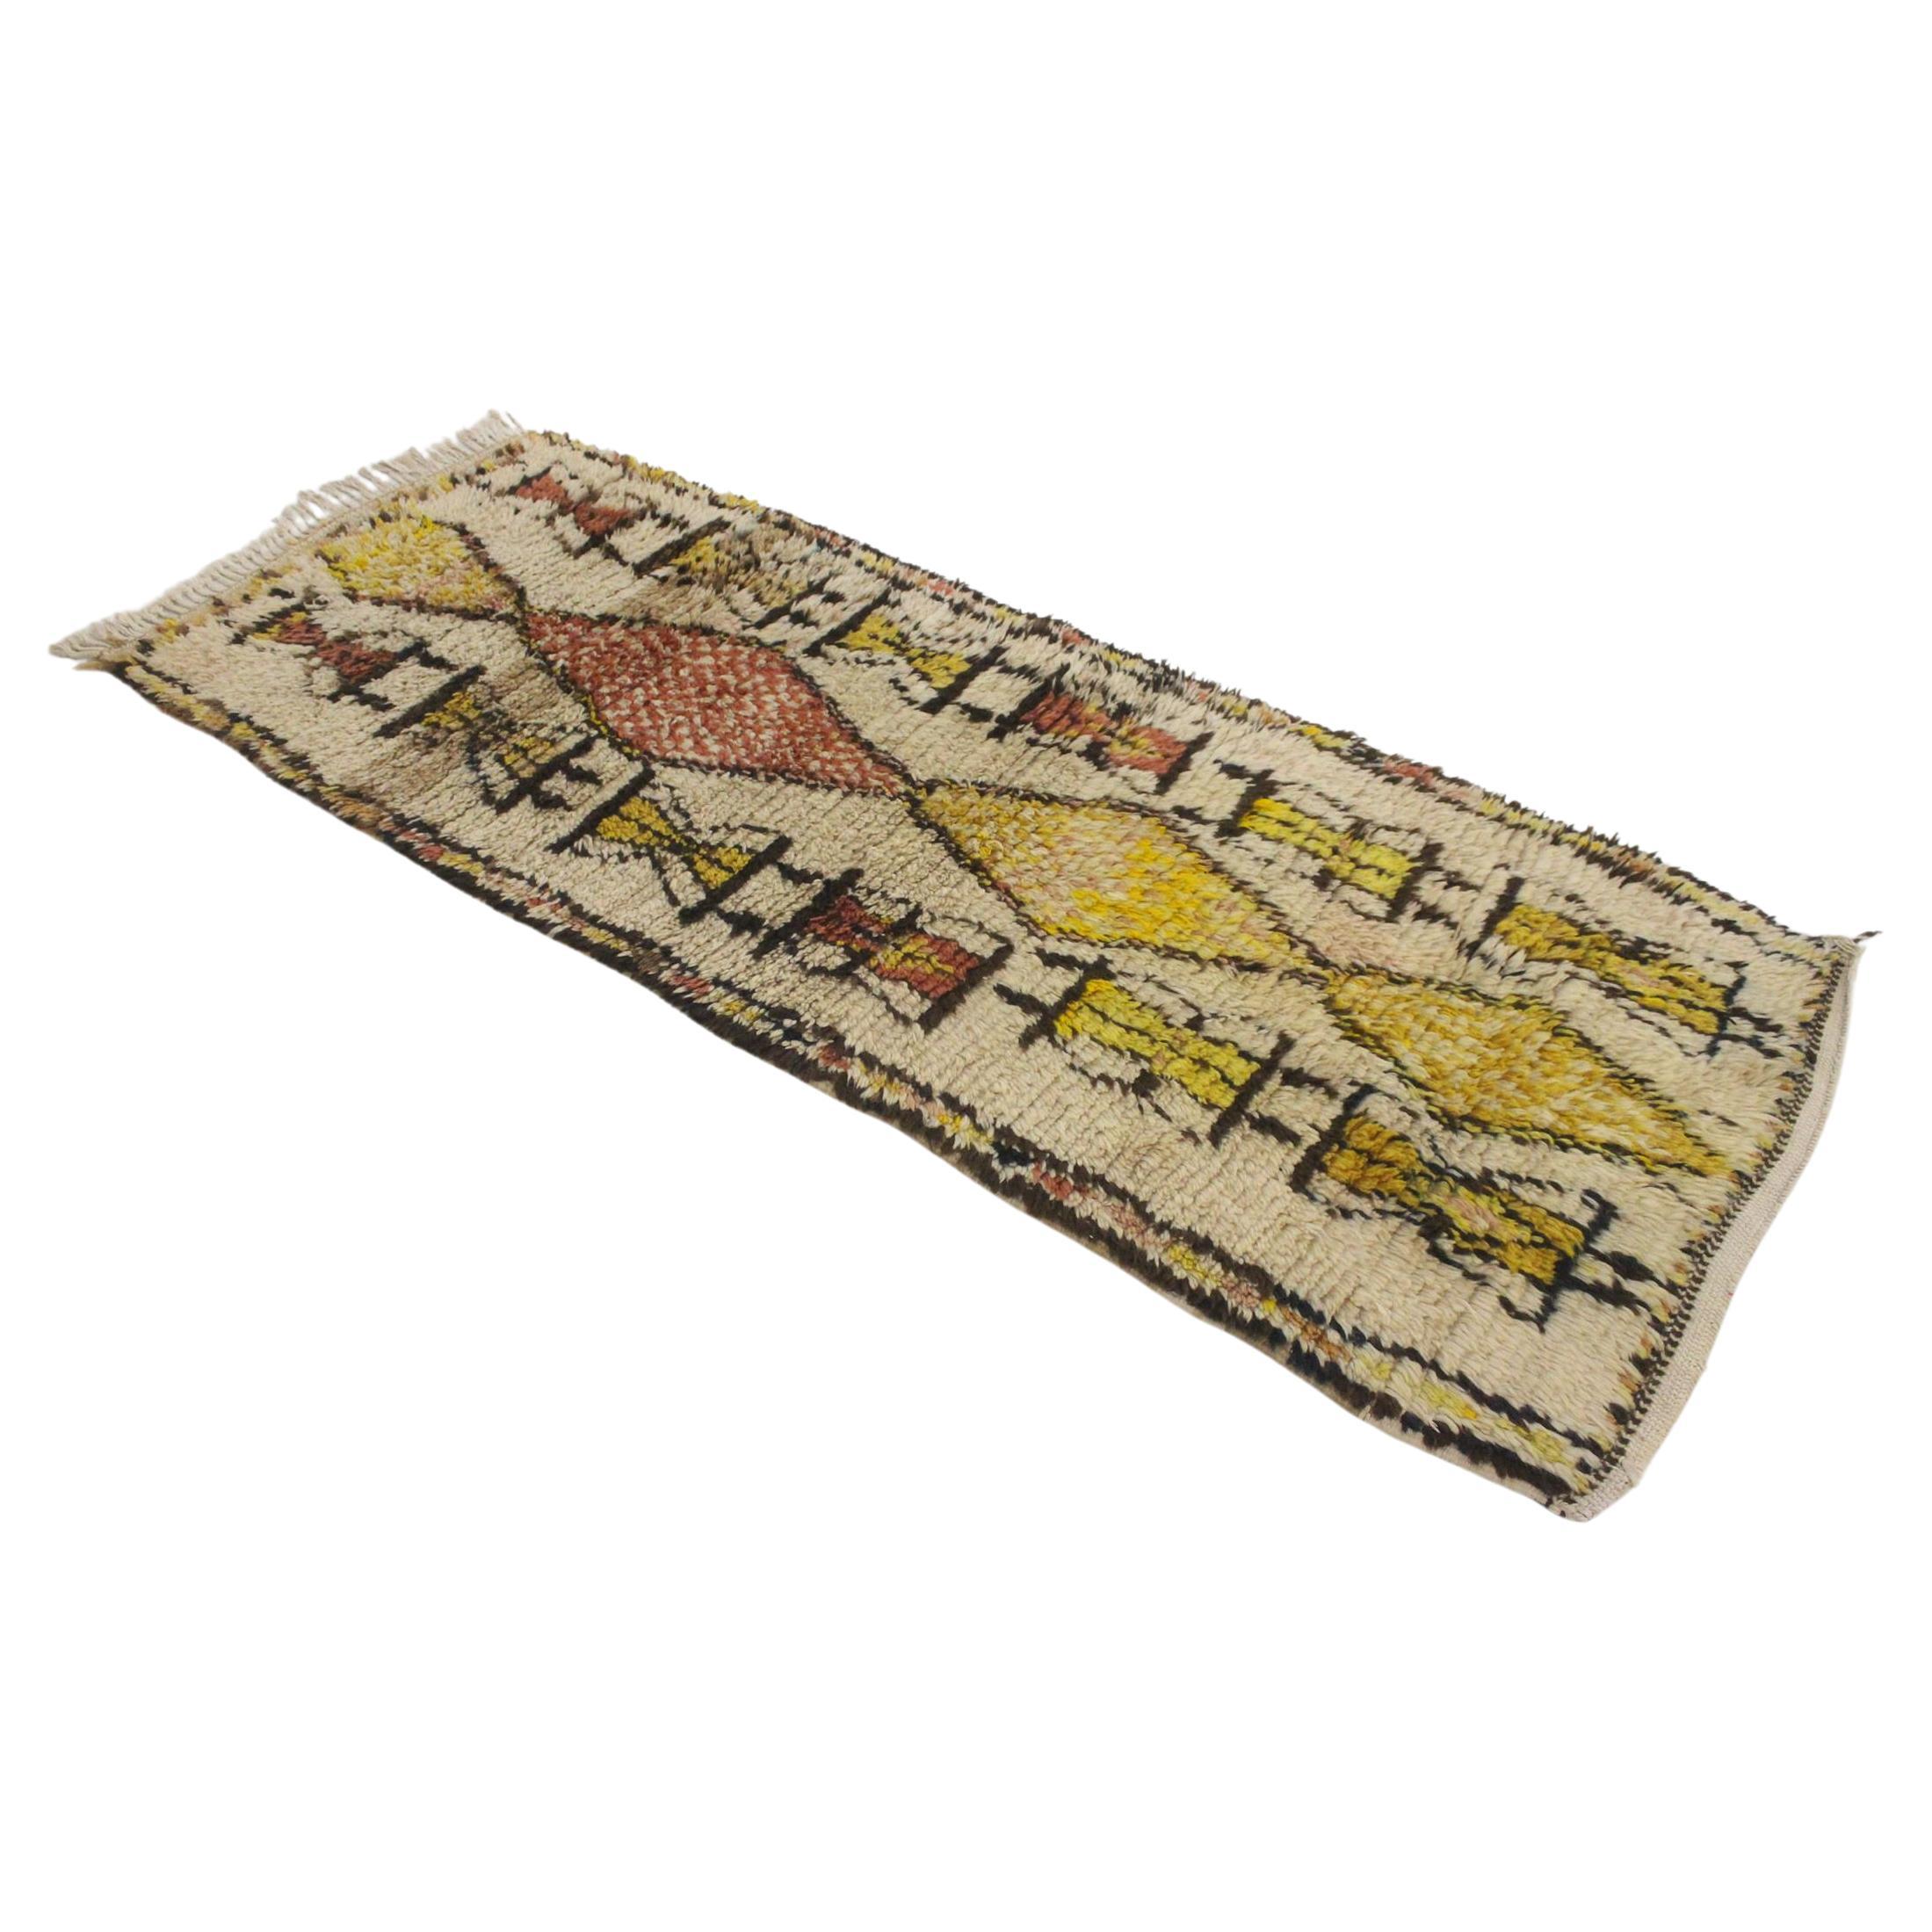 Vintage Moroccan Azilal rug - Beige, yellow, terracotta - 2.7x6.8feet / 84x207cm For Sale